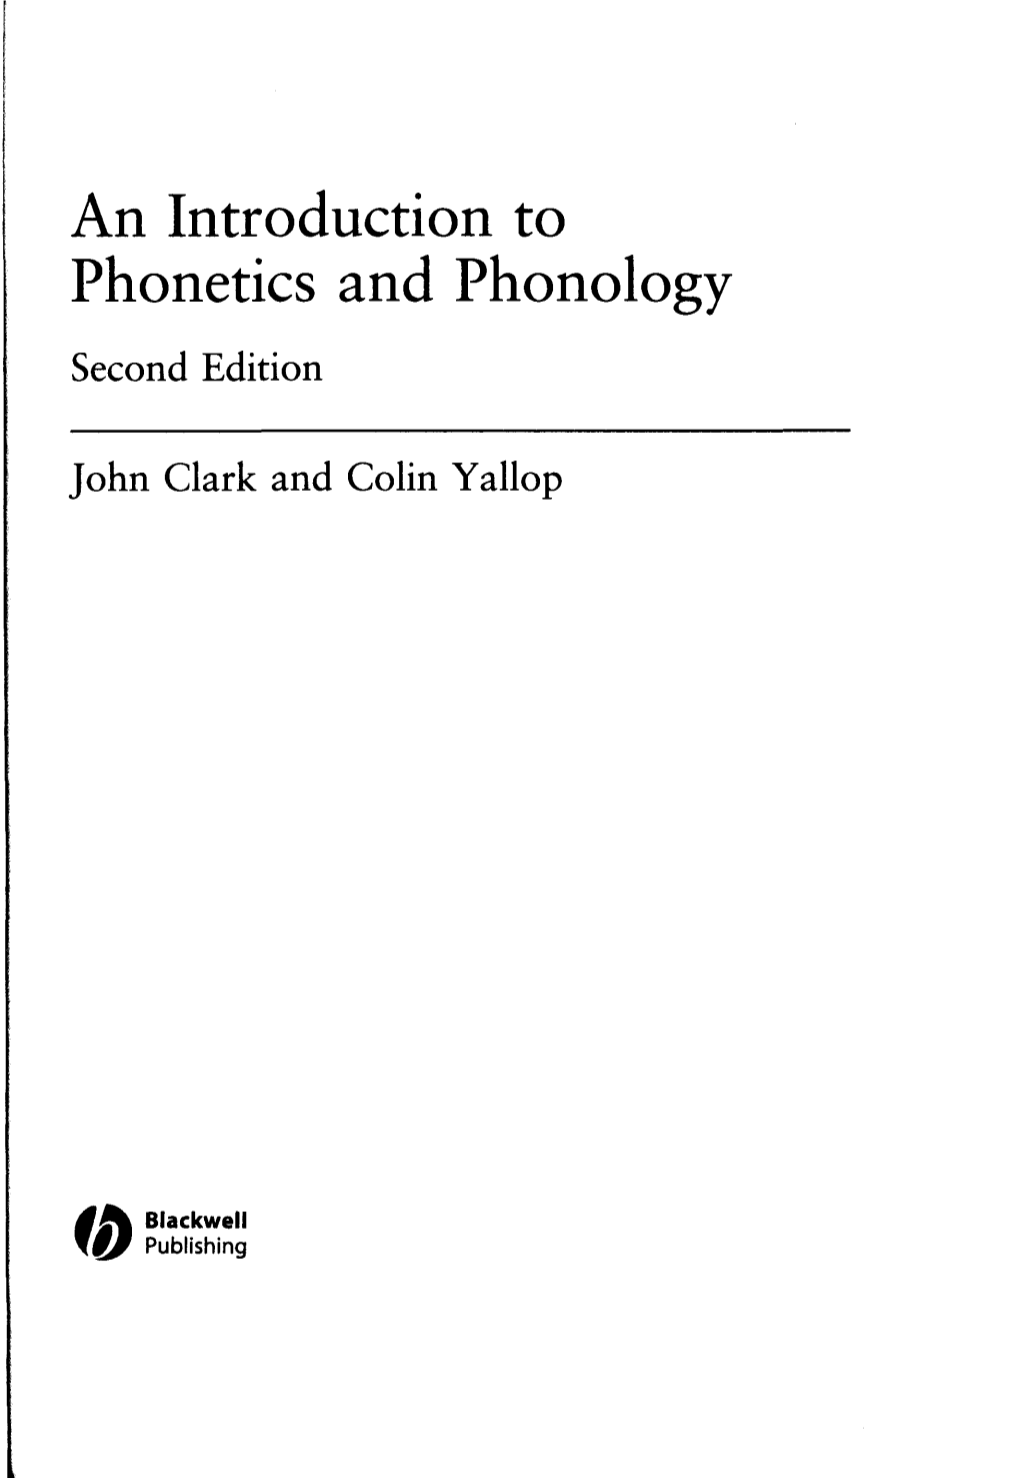 An Introduction to Phonetics and Phonology Second Edition